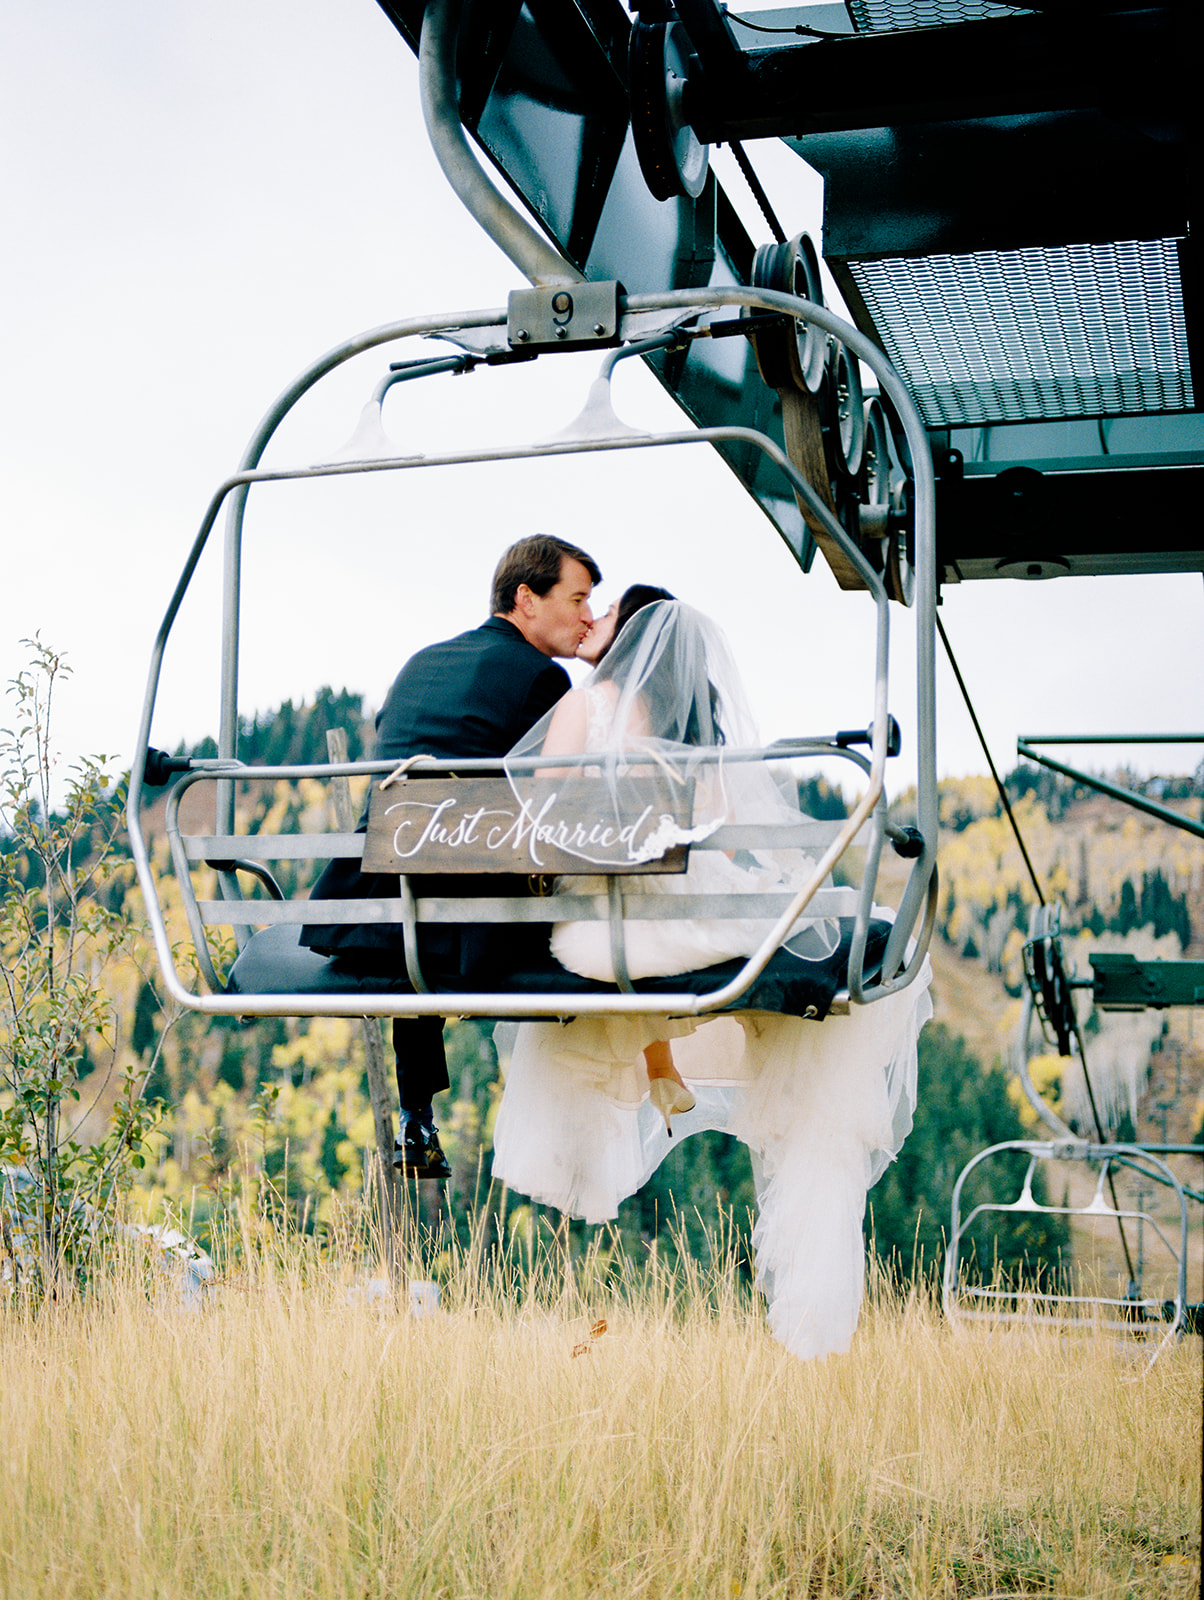 A fall wedding in Park City Utah. The bride wearing a white veil and groom in black tux are sitting on the lift that takes them back to their reception.